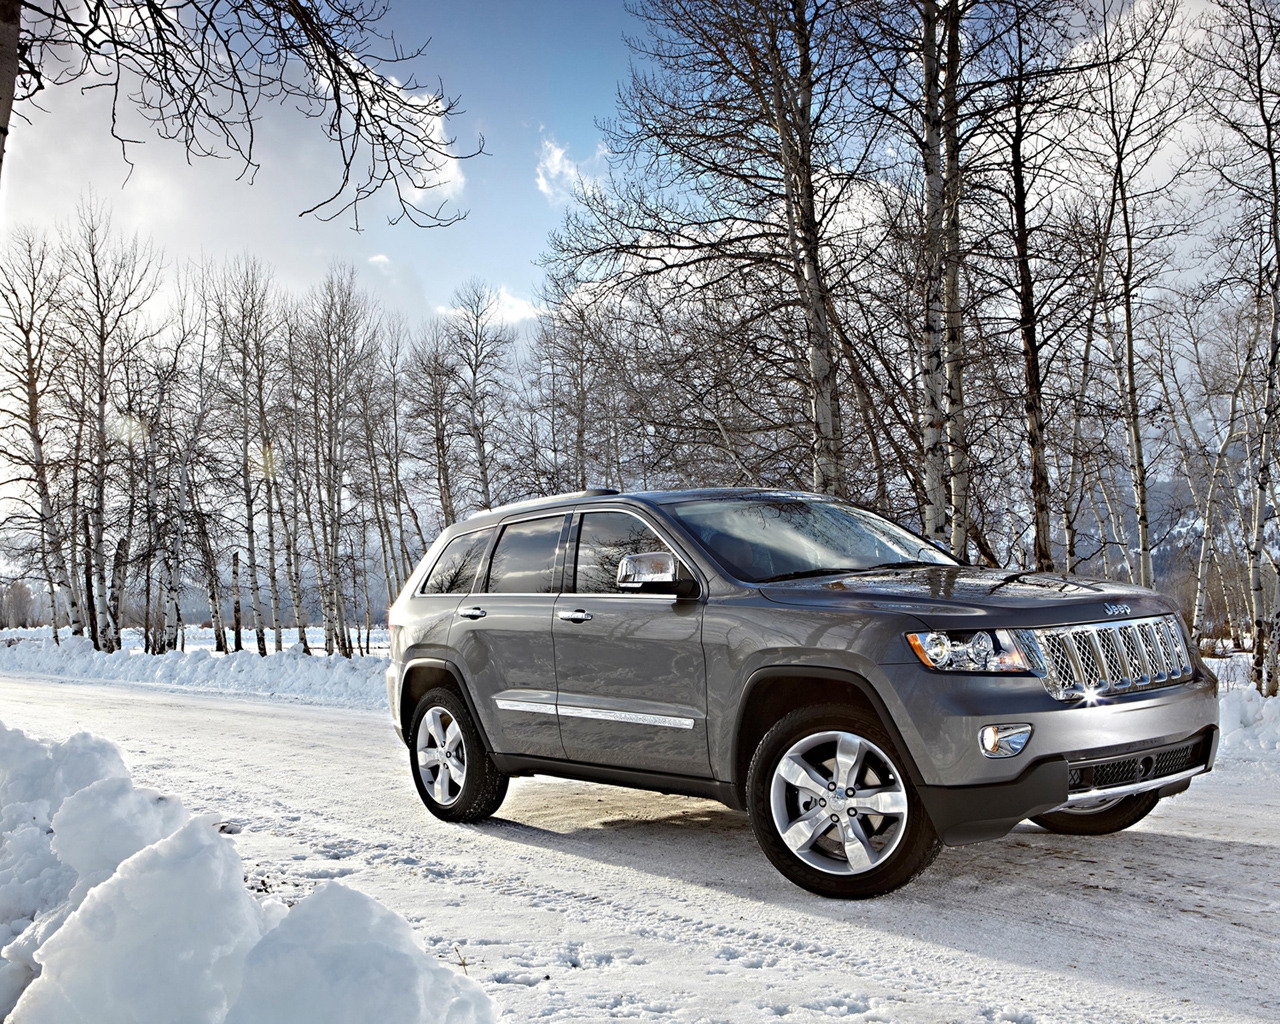 2012 Jeep Grand Cherokee for 1280 x 1024 resolution